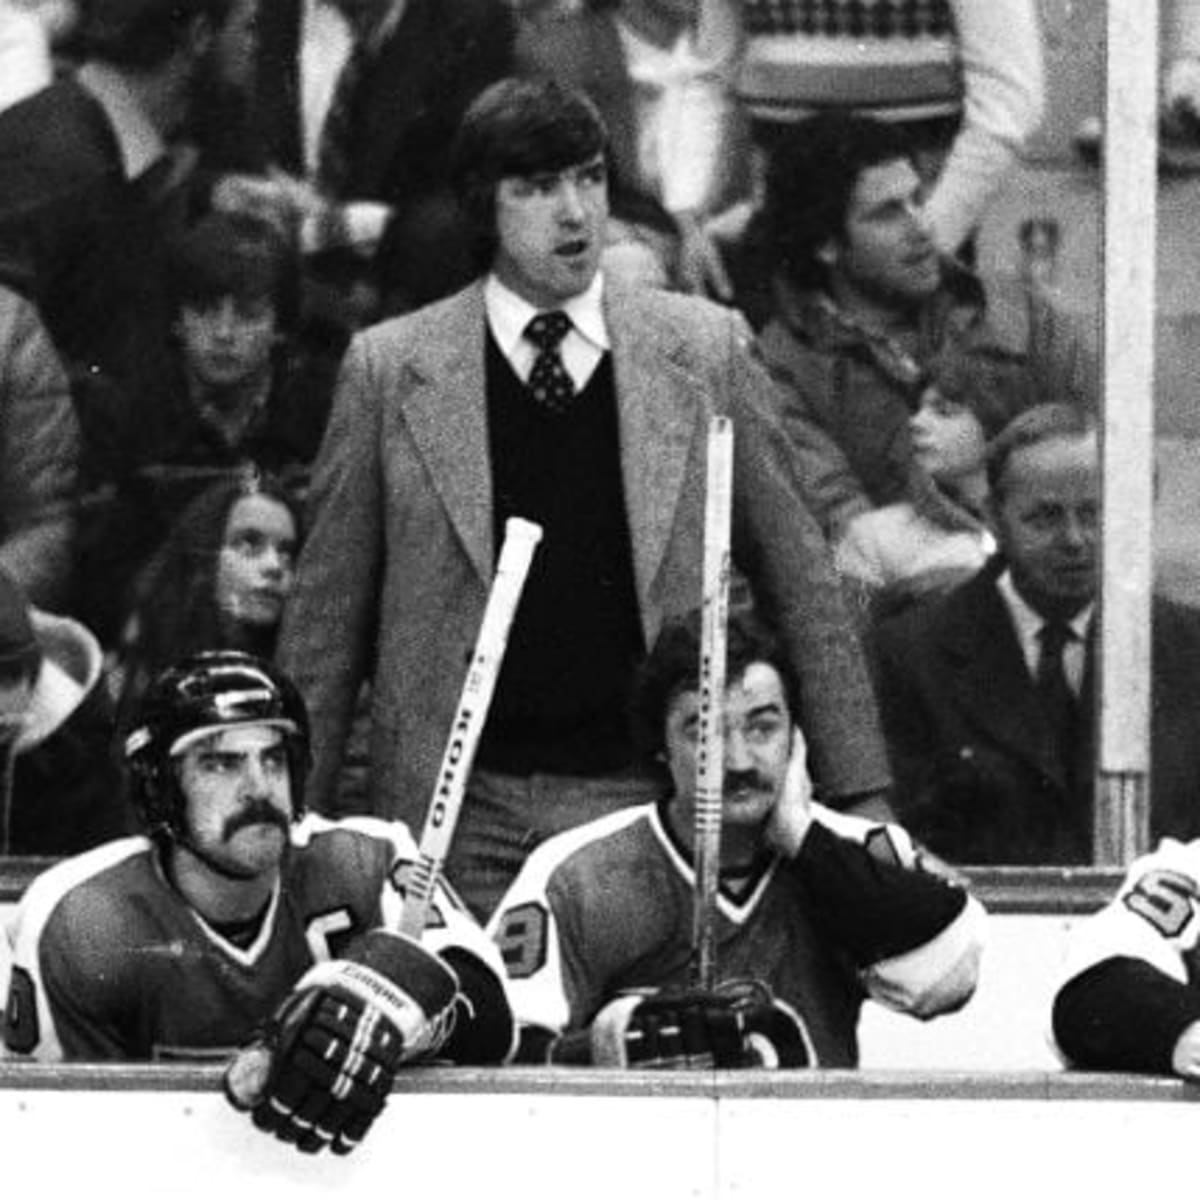 1980: Bobby Nystrom's OT goal gives NY Islanders the Stanley Cup